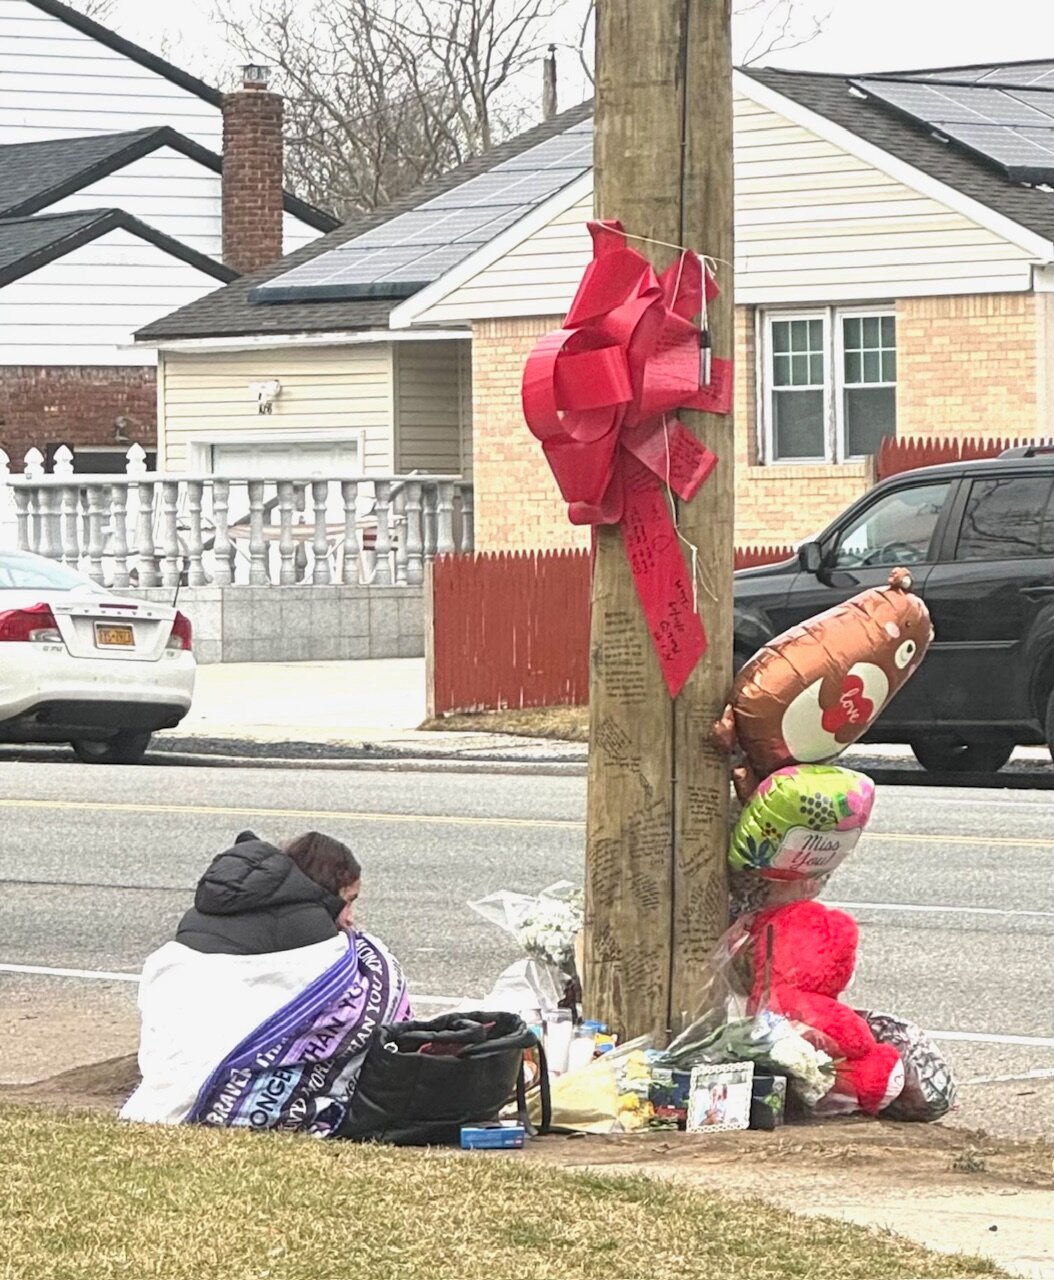 A makeshift memorial in memory of Pablo Rivera, who died in the one-car crash on Rosedale Road near Lawrence Court in North Woodmere on Feb. 10.